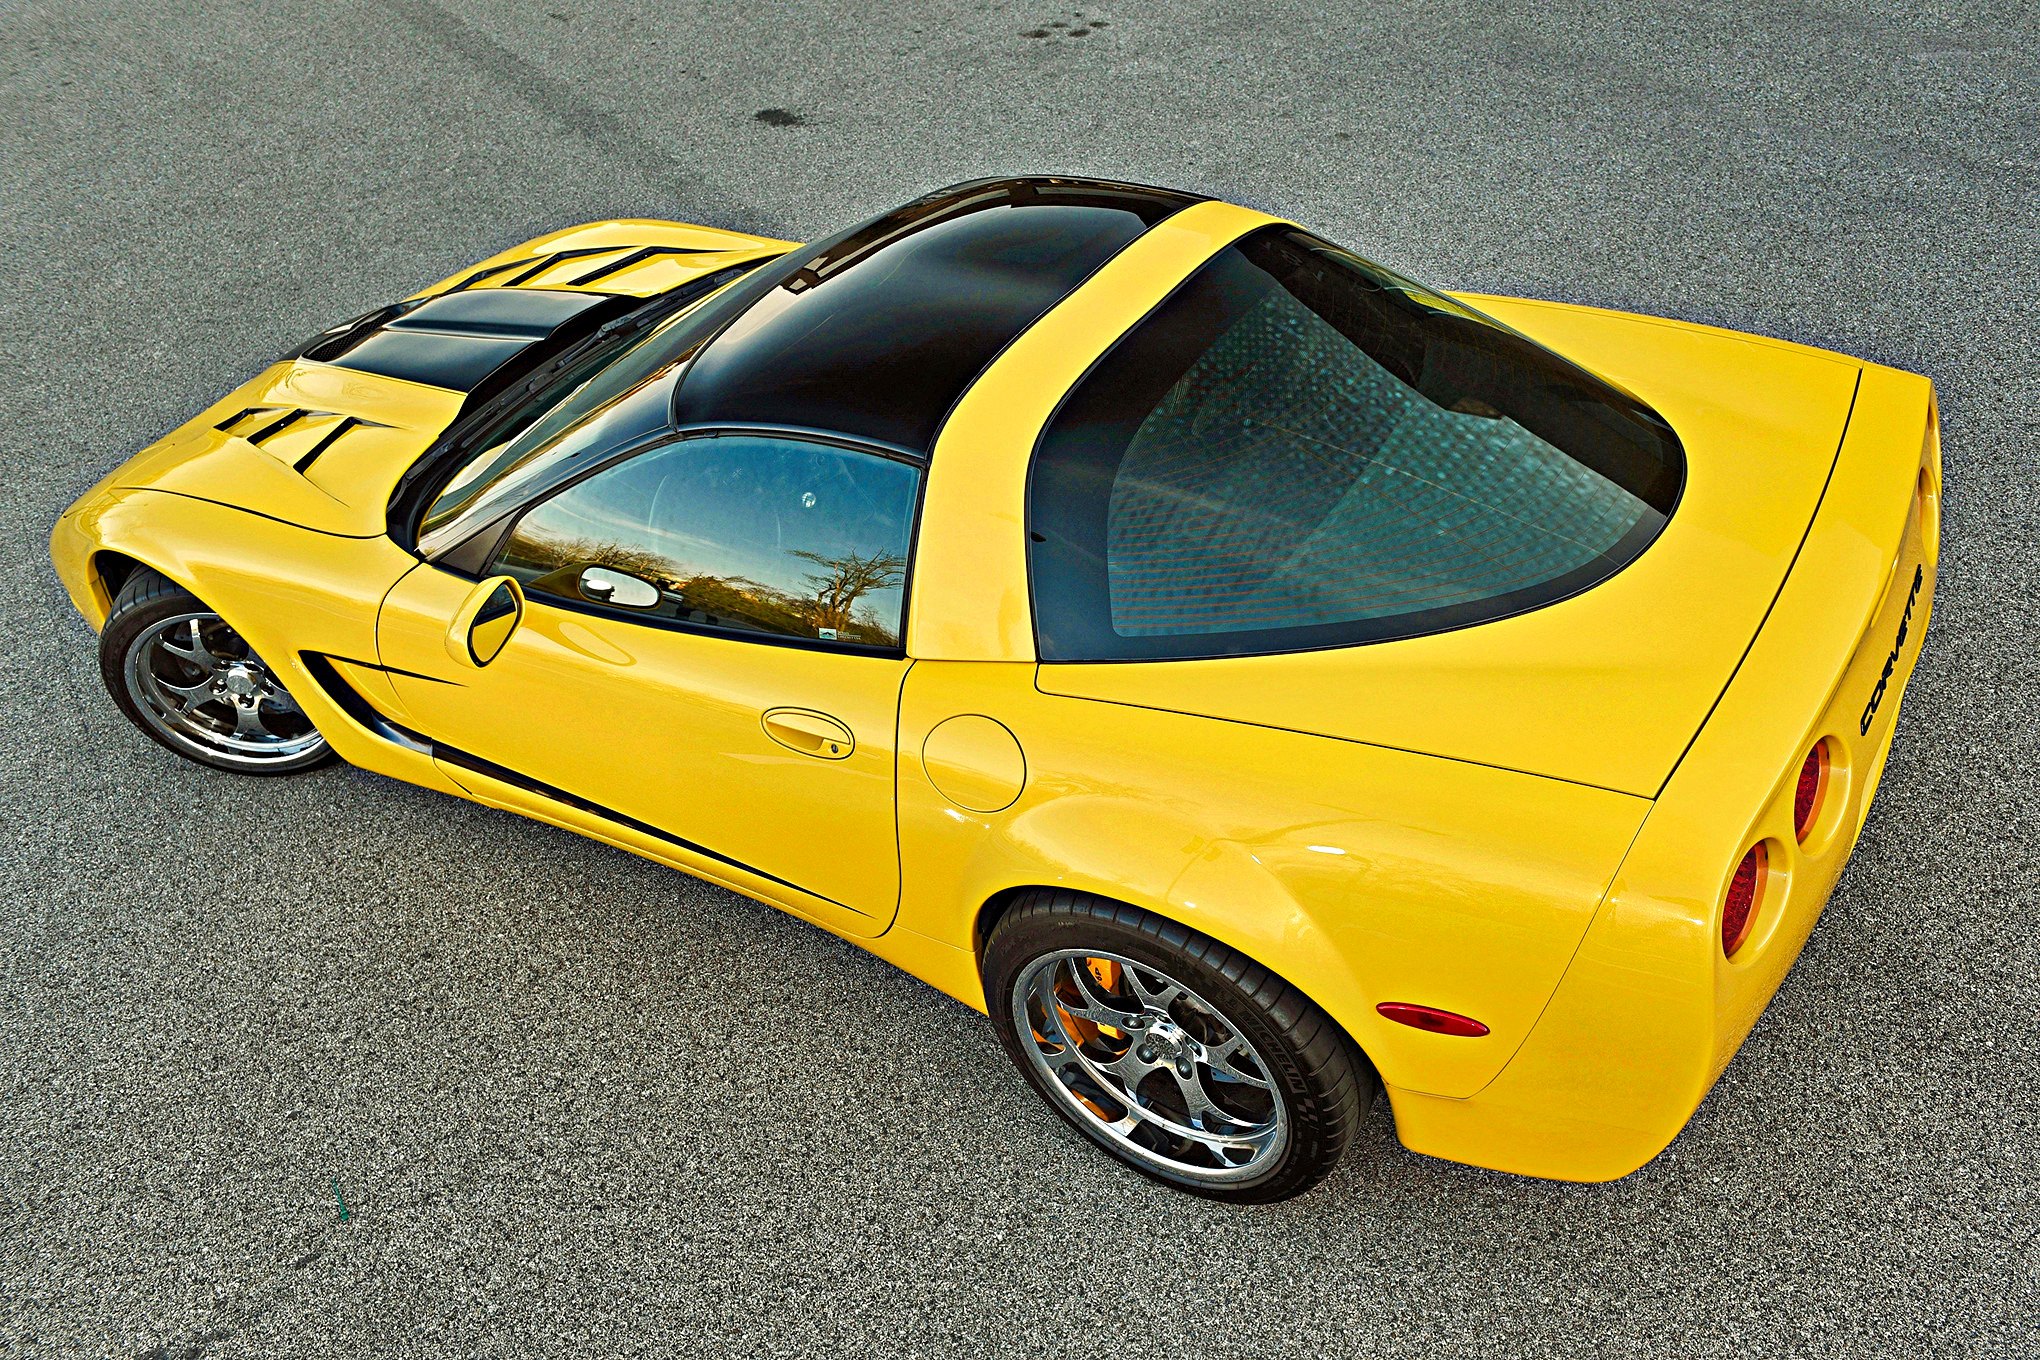 Custom Roof on Yellow Chevy Corvette - Photo by Scotty Lachenauer